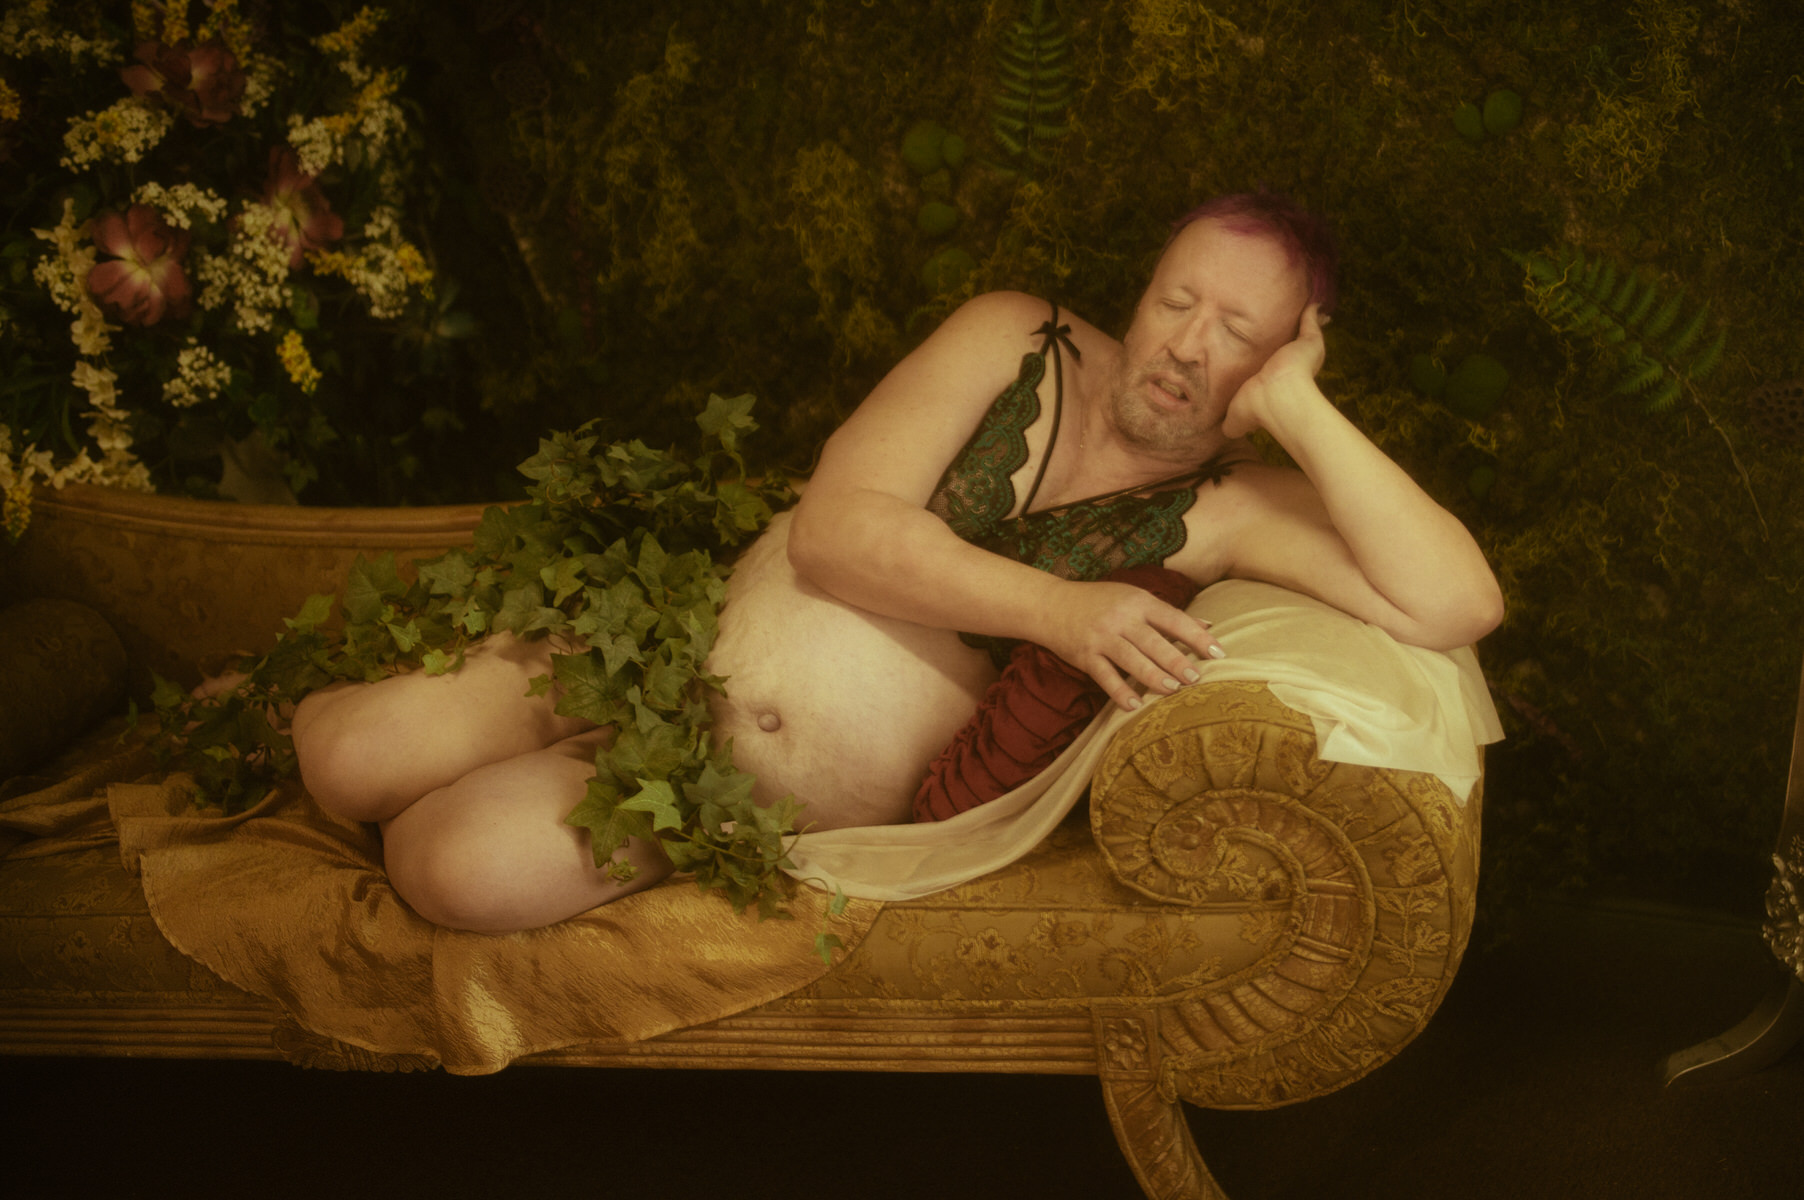 A trans woman laying on a couch covered in ivy.